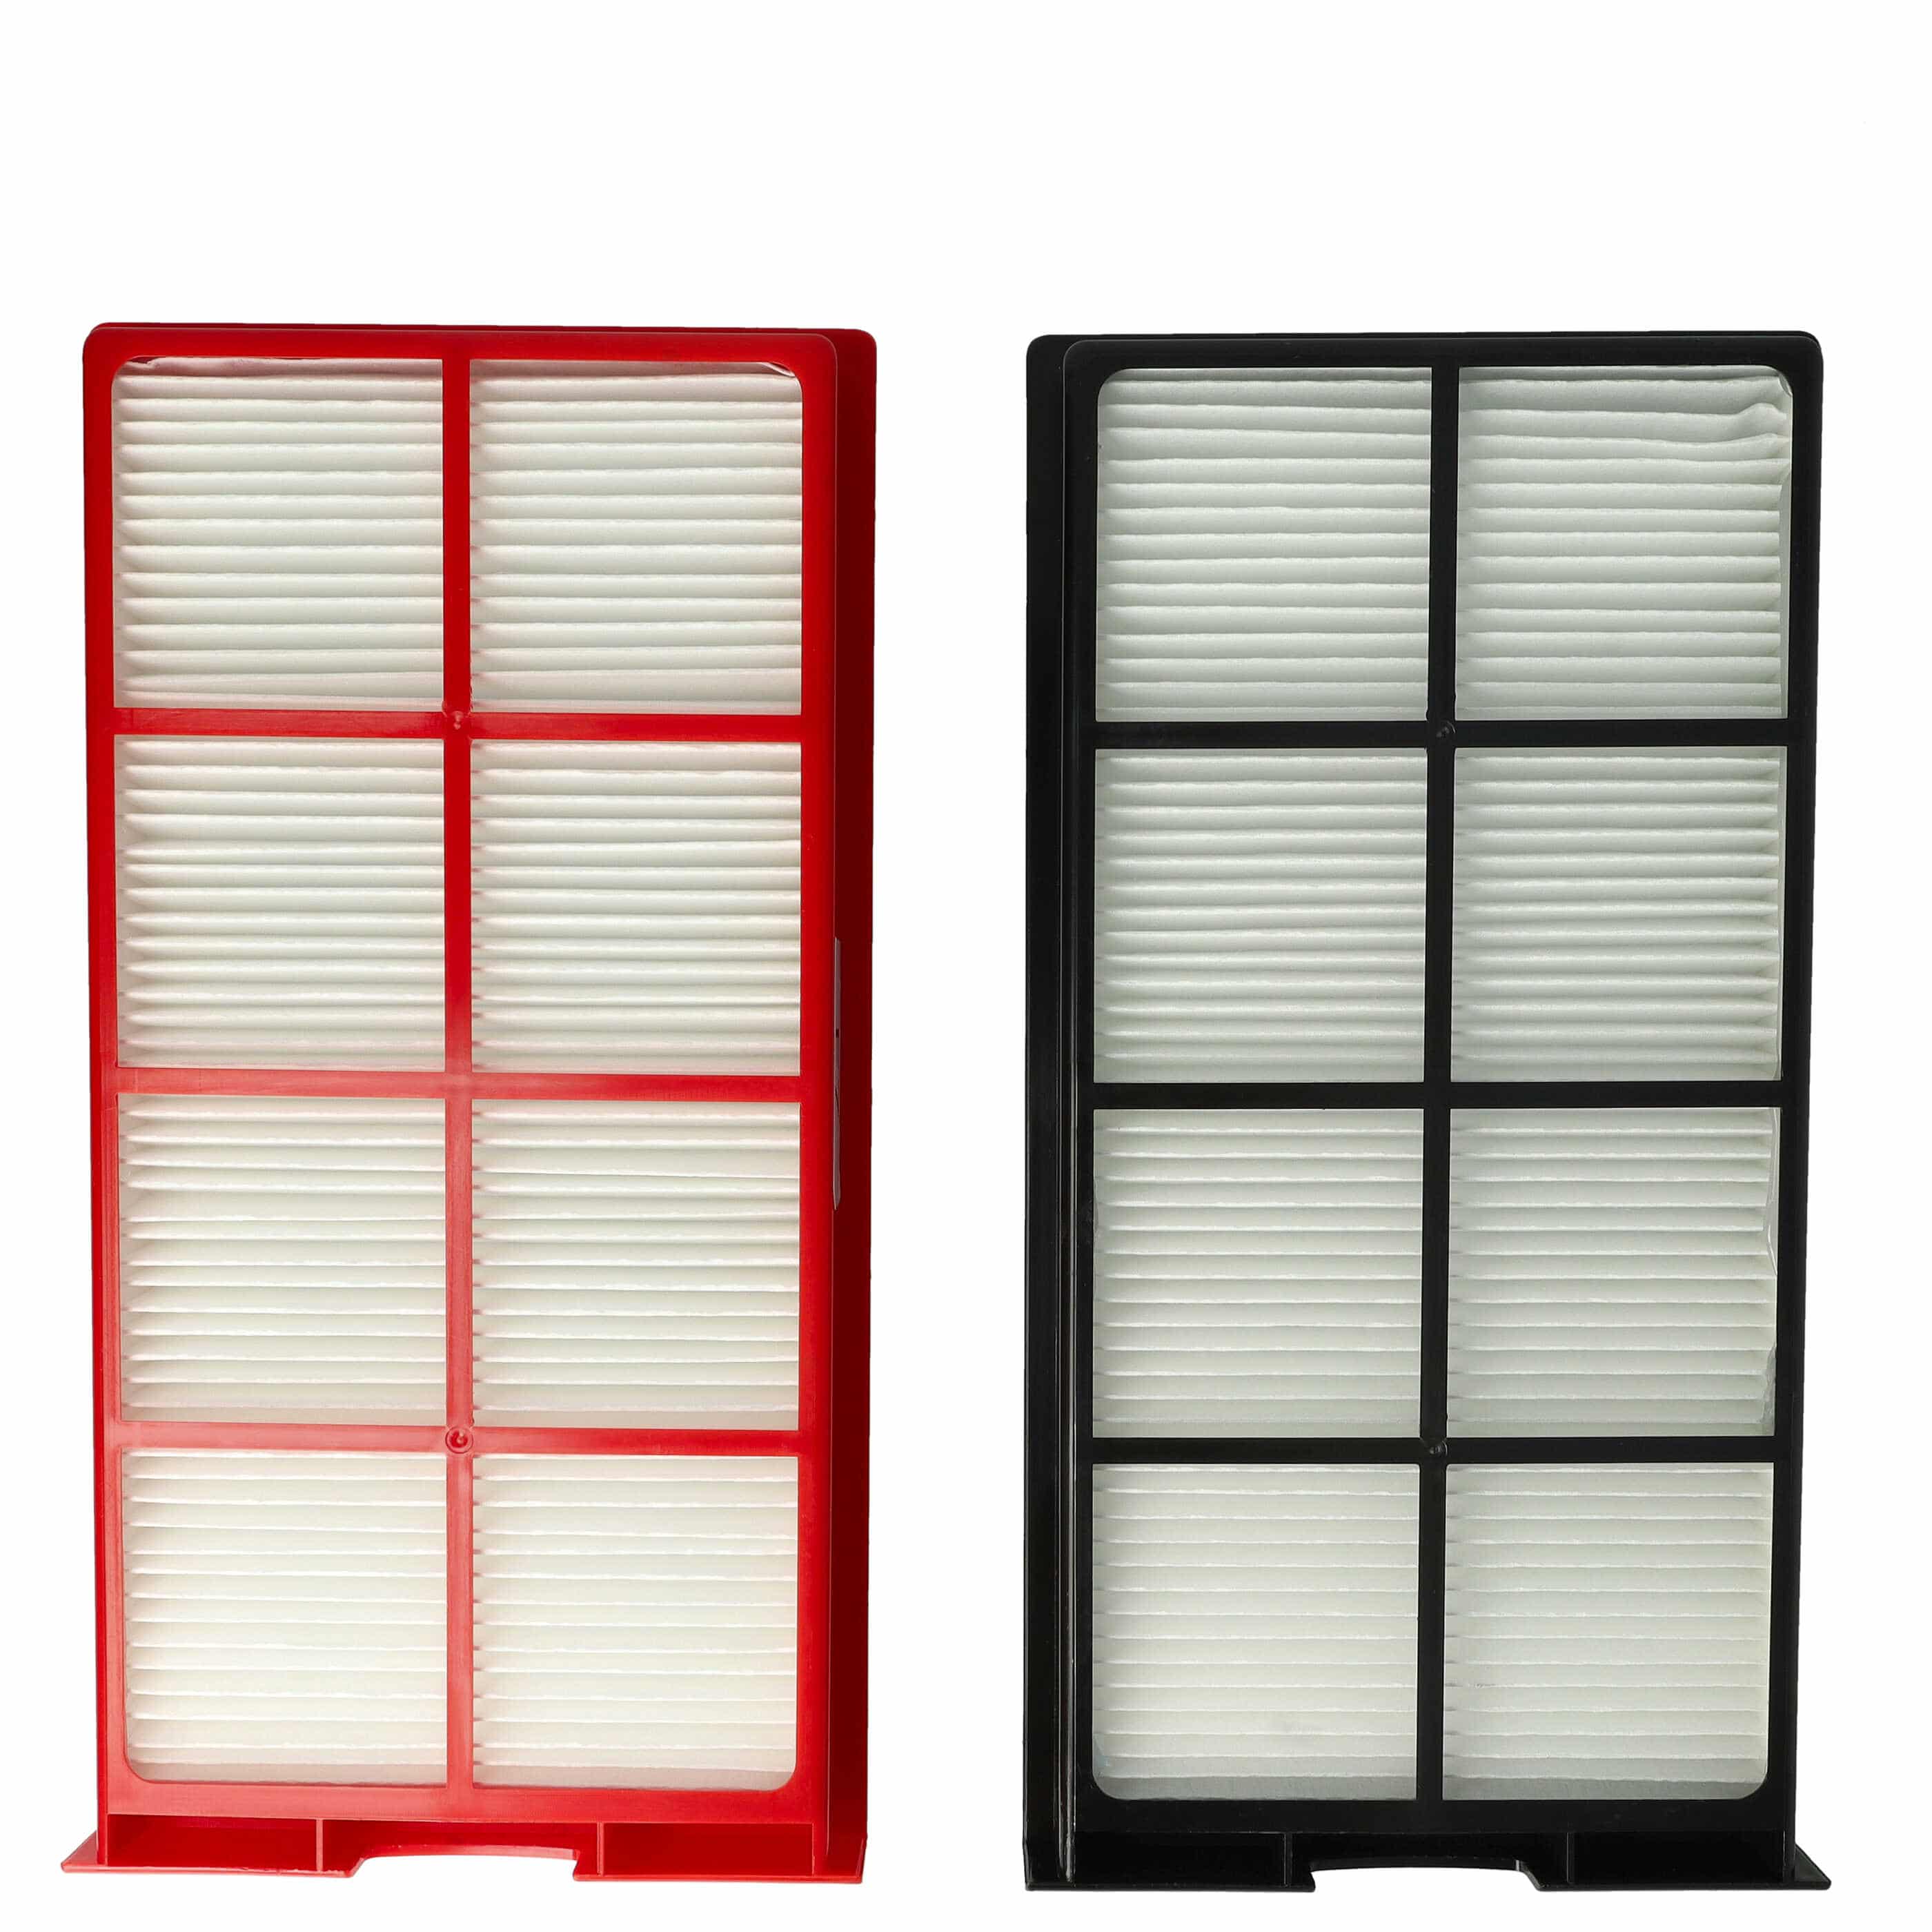 Air Filter Set Replacement for Wernig EFS G 90-200 GF for Ventilation Devices - G4 / F7